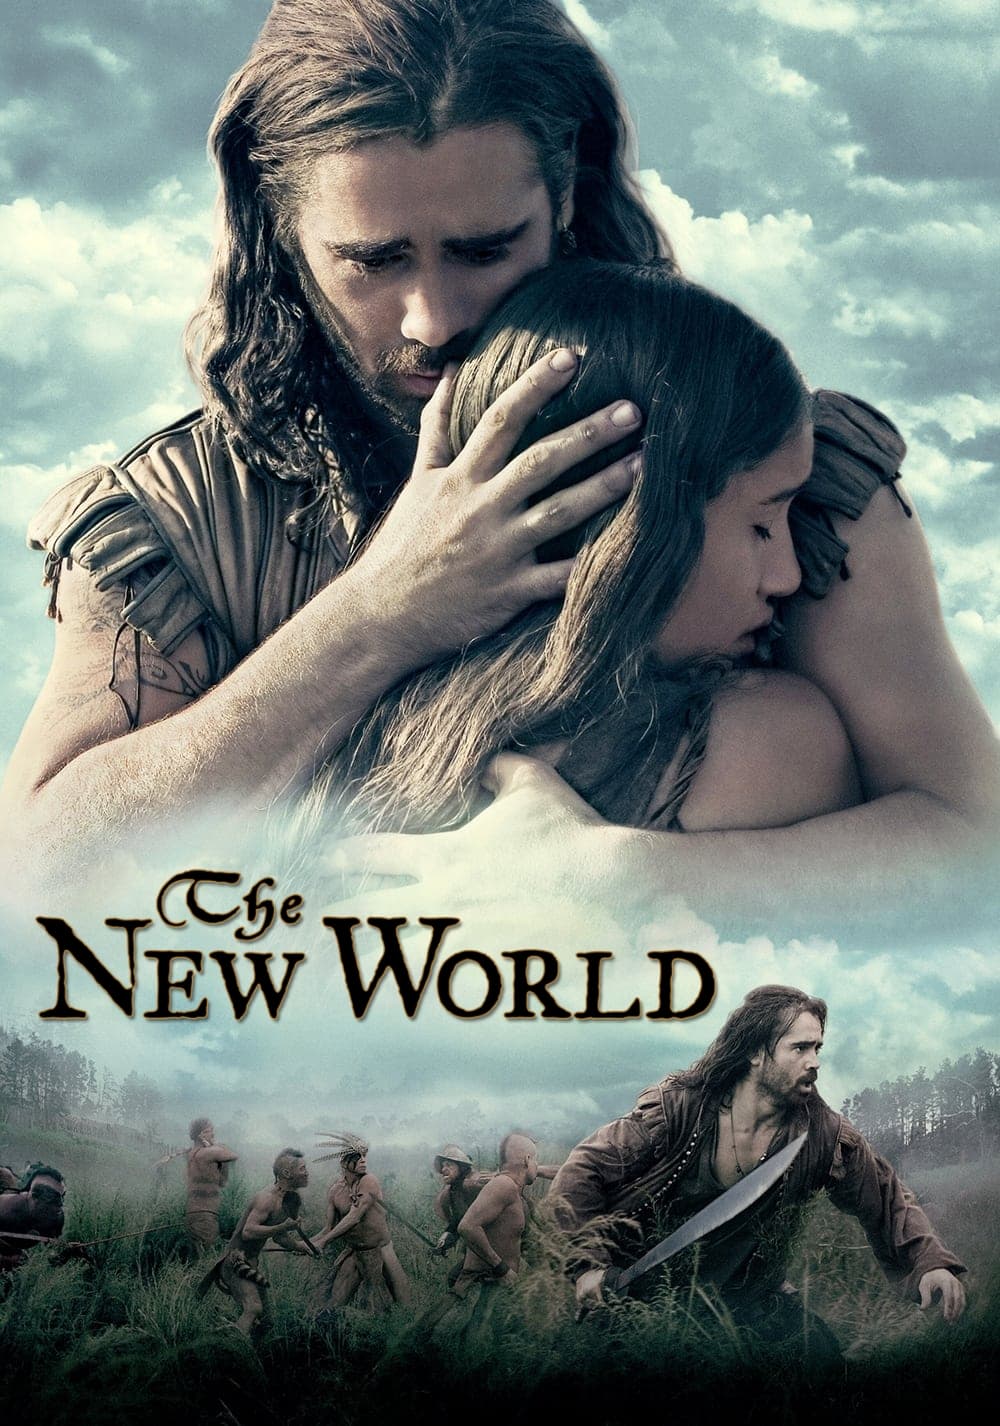 The New World POSTER